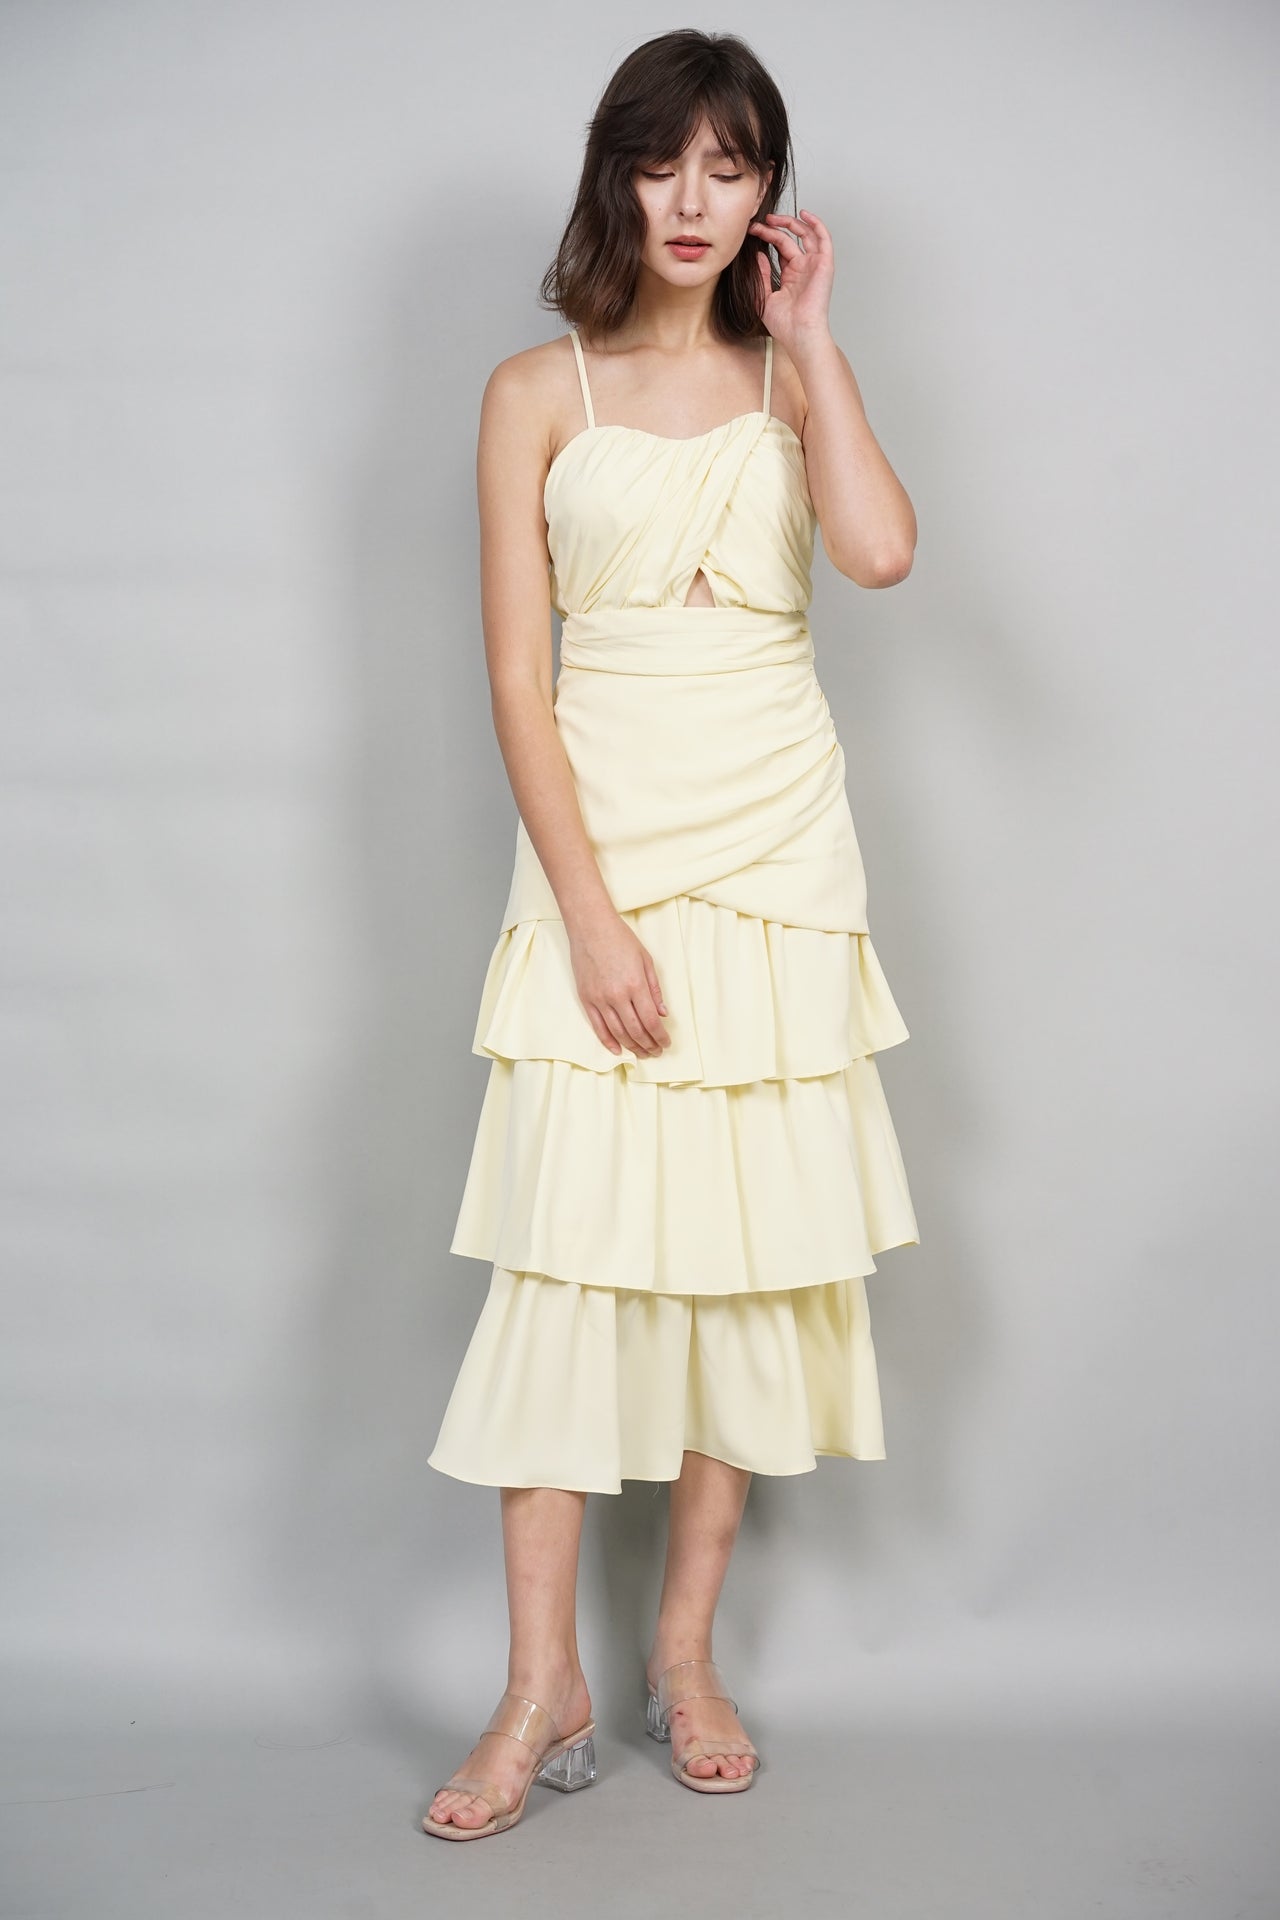 Ruched Tiered Dress in Yellow - Arriving Soon